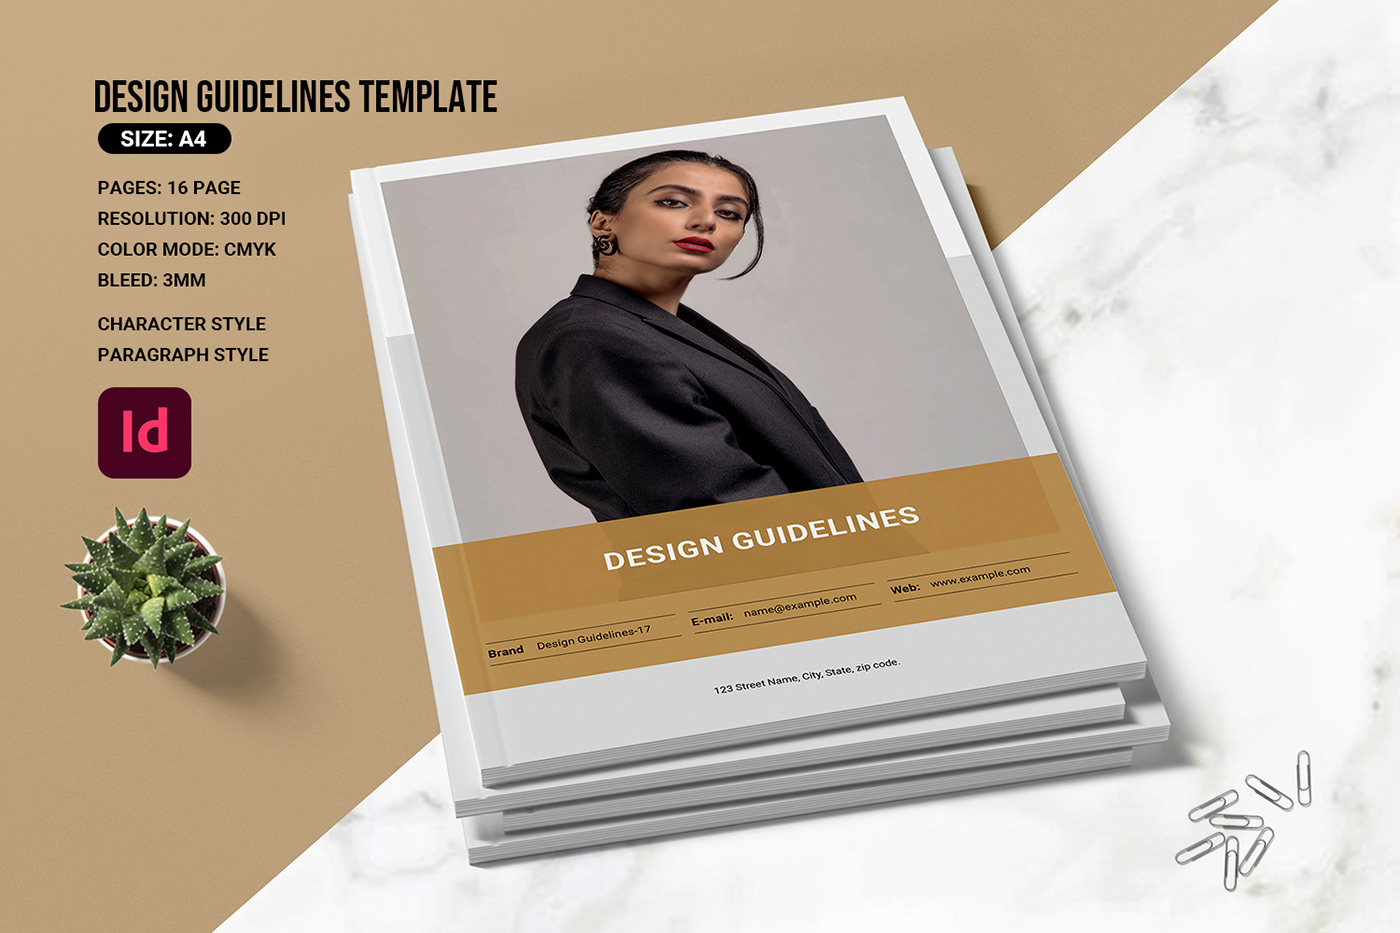 Brand Guideline brand manual Brand Presentation brand proposal Brand style brandbook branding guide Brochure Template design guidelines Style Guide